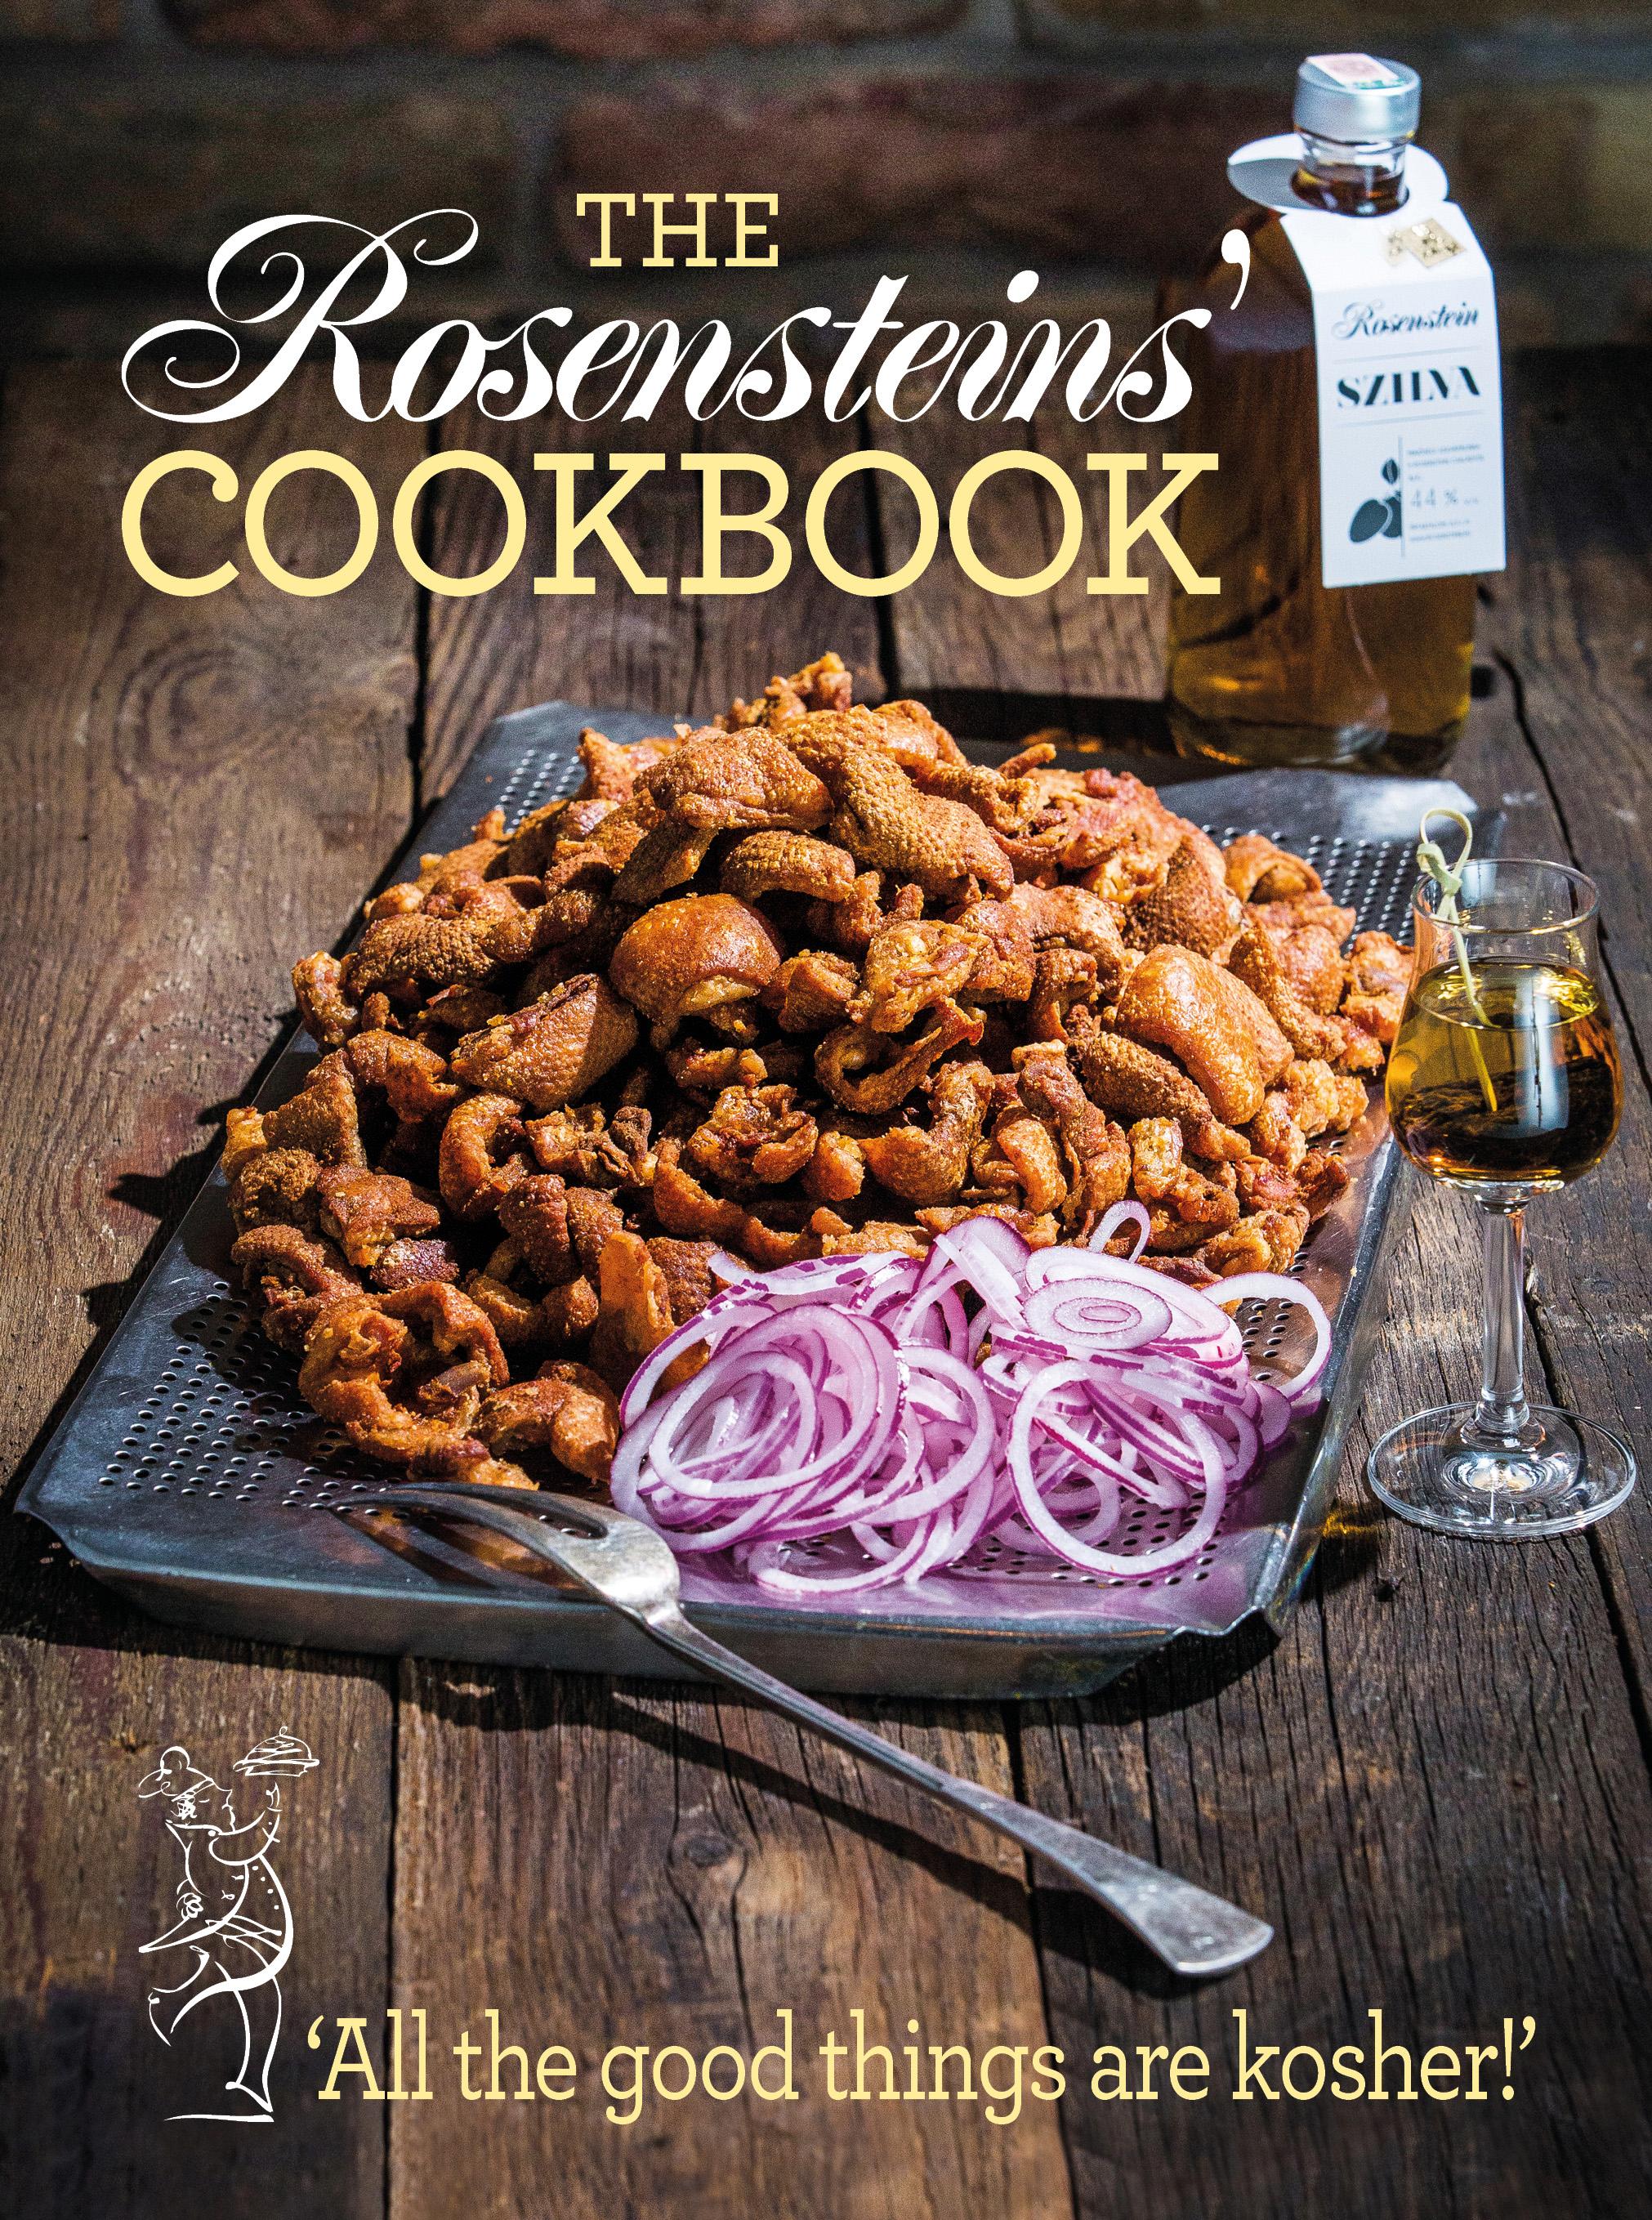 ROSENSTEIN THE COOKBOOK - " All the good things are kosher"